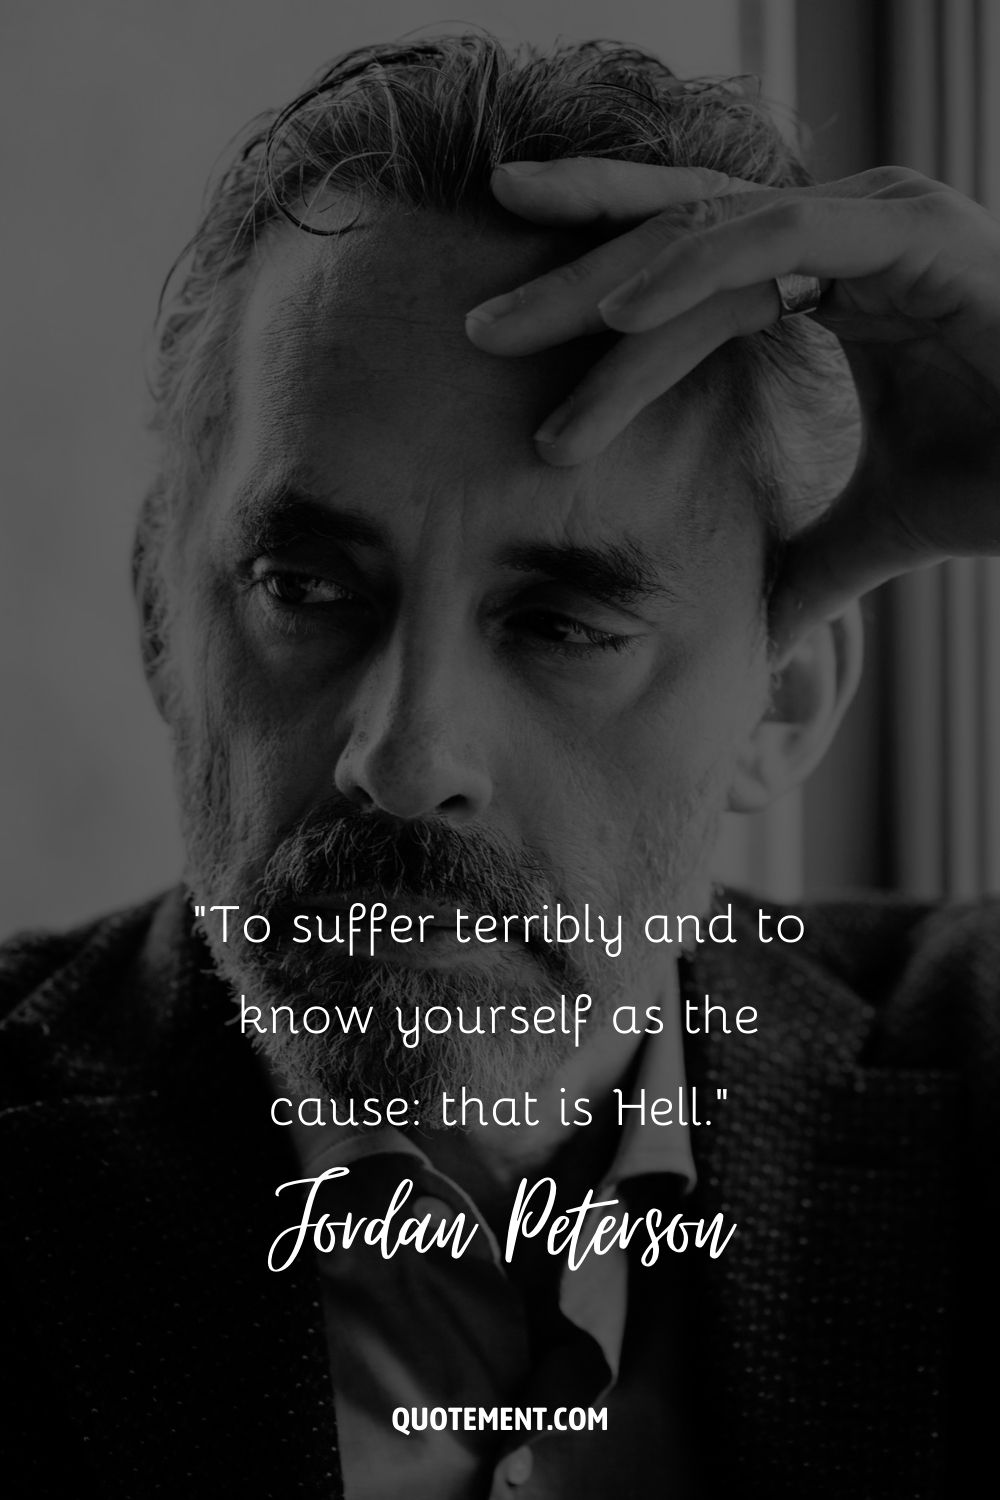 Jordan peterson quote to make you think.